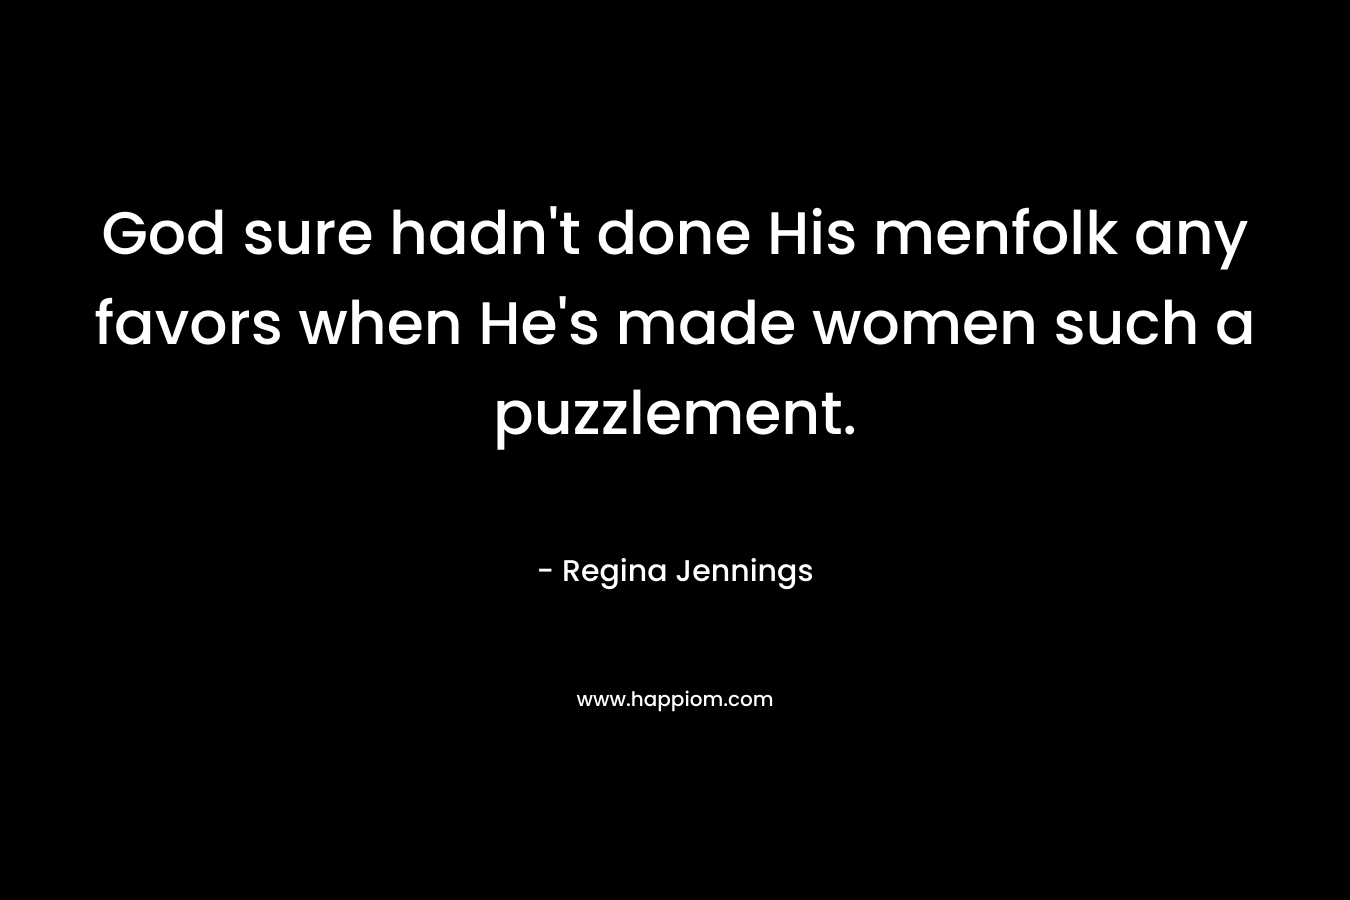 God sure hadn’t done His menfolk any favors when He’s made women such a puzzlement. – Regina Jennings